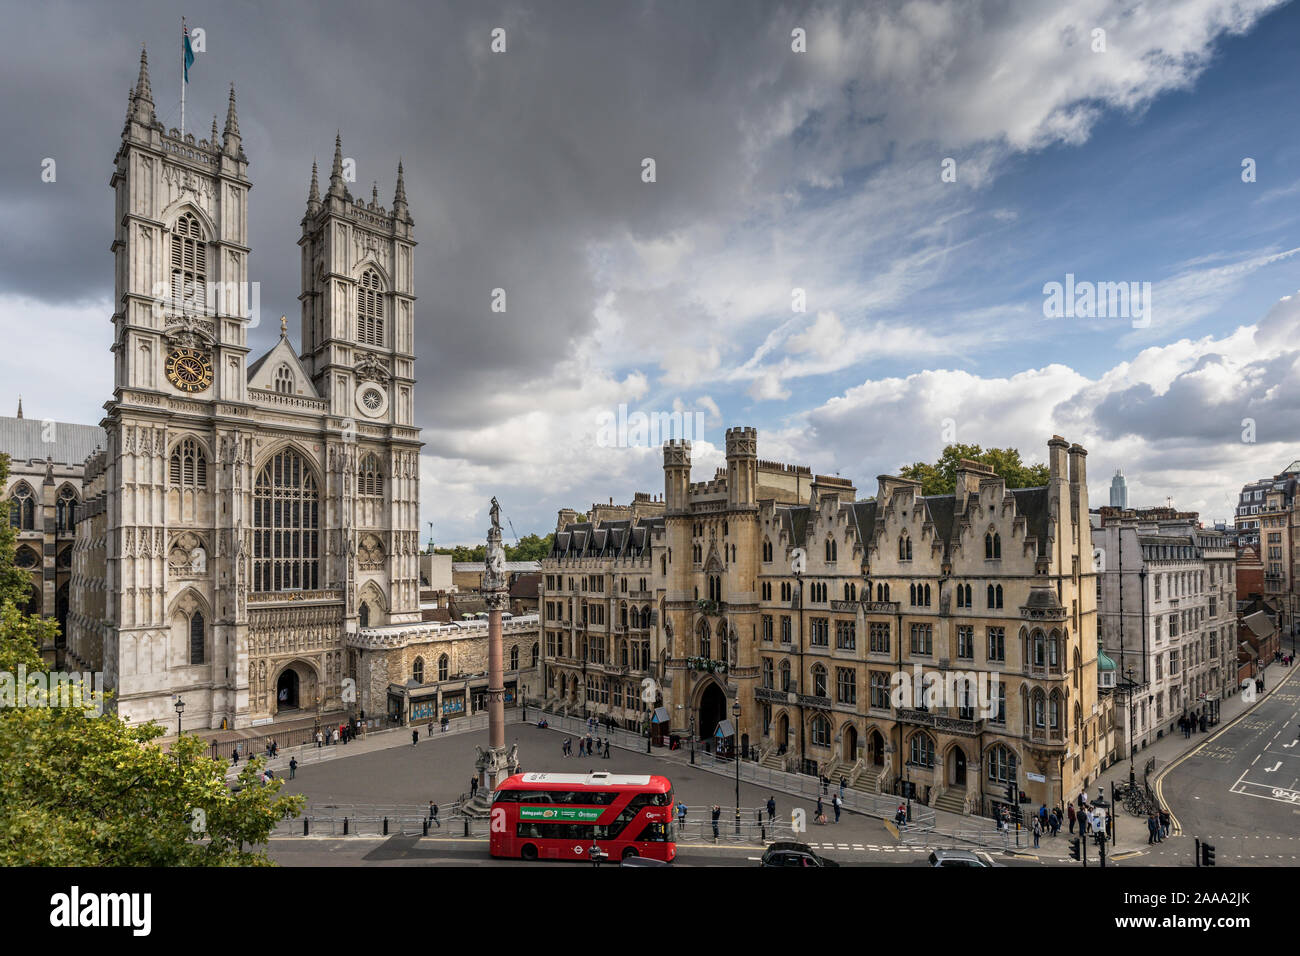 View from the Methodist Central Hall towards Westminster Abbey, London, England. Taken during Open House London. Stock Photo